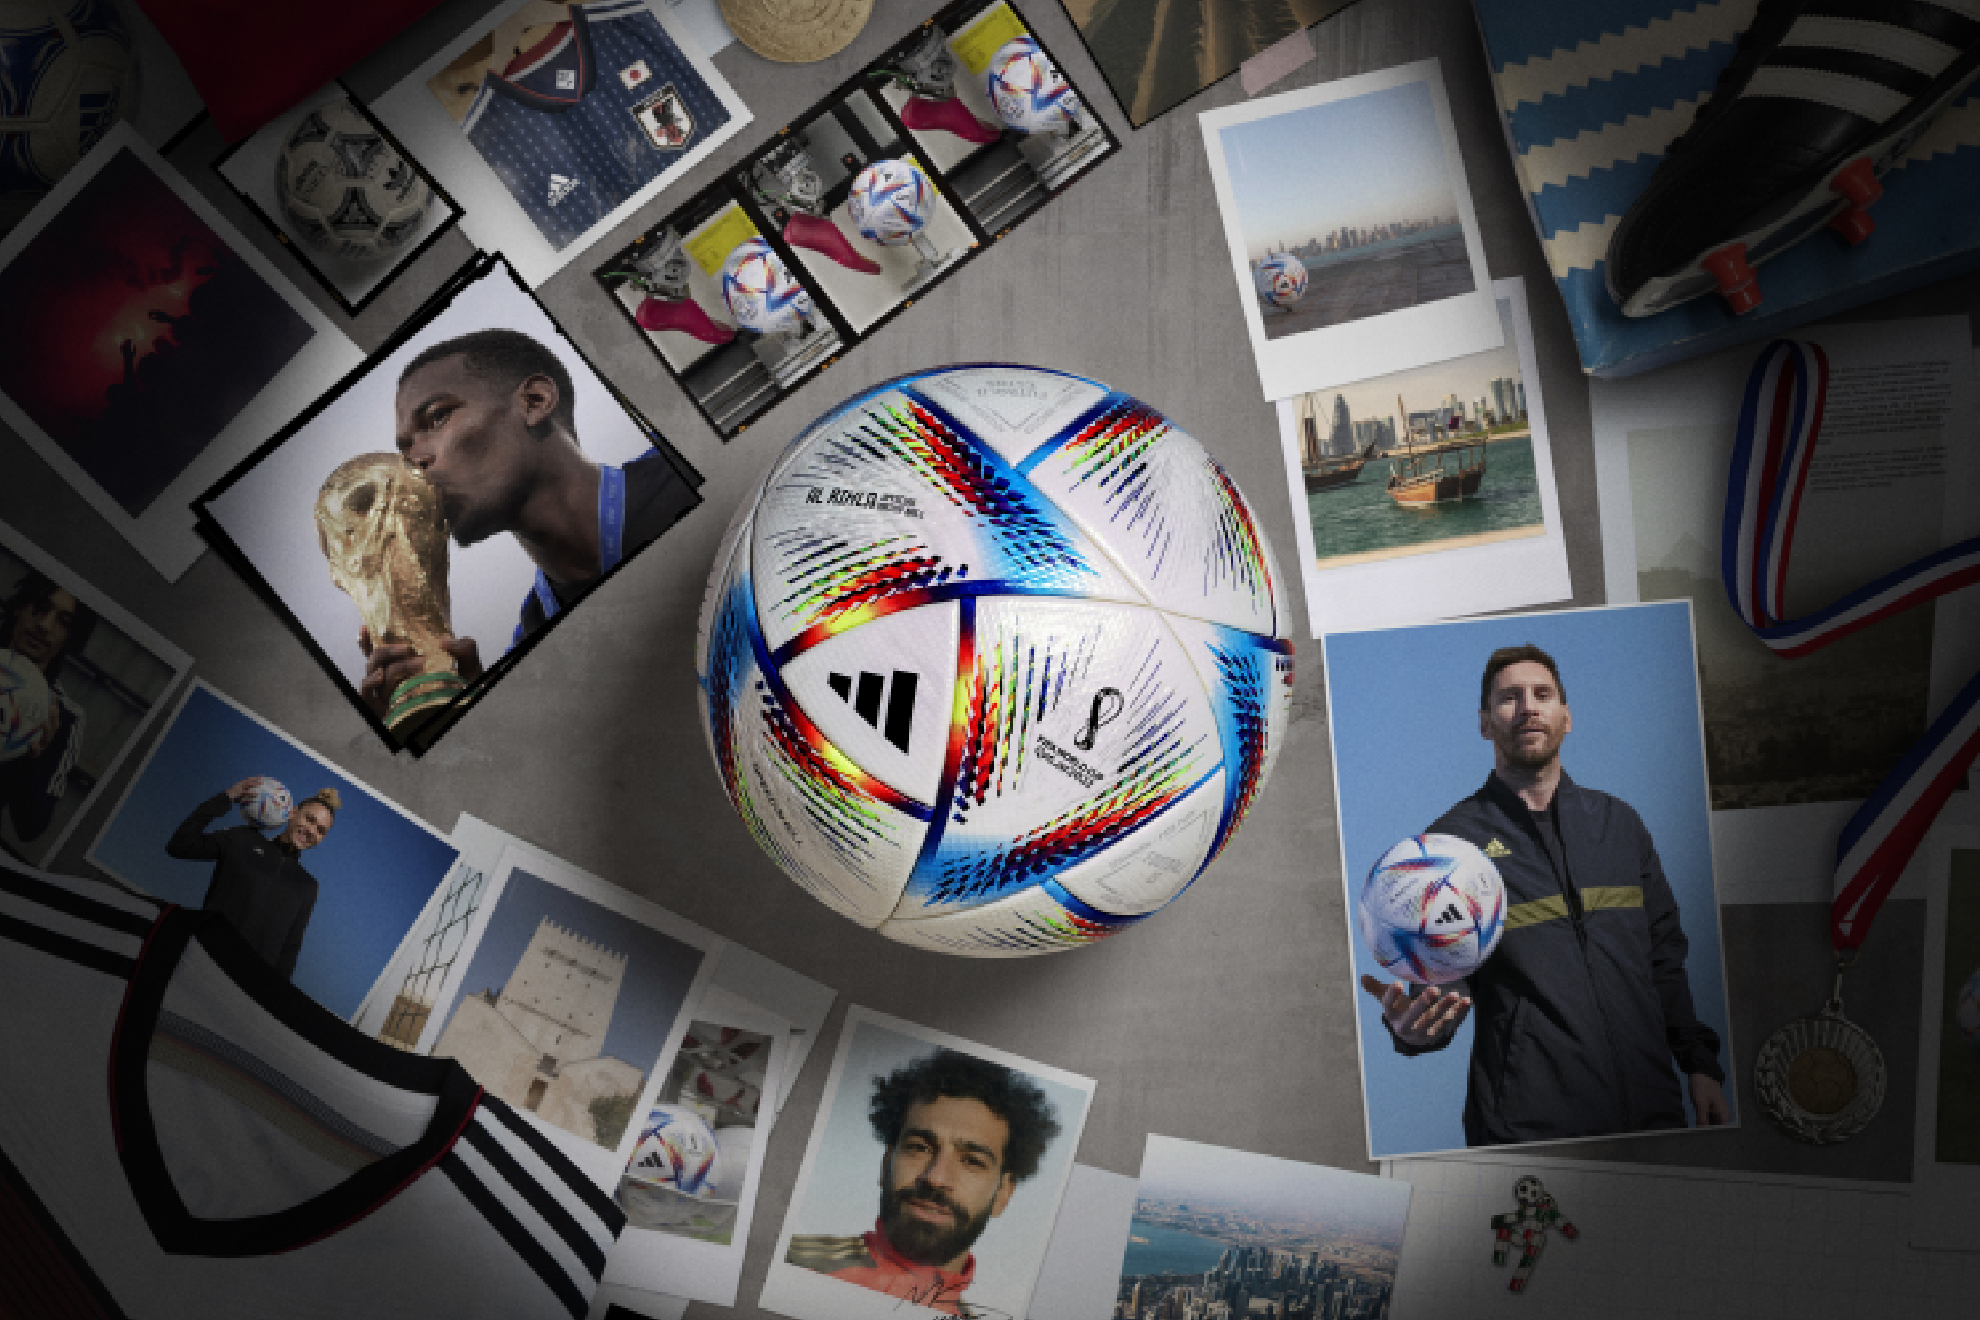 World Cup 2022 Which ball will be used for the 2022 Qatar World Cup? This is the design and branding Marca